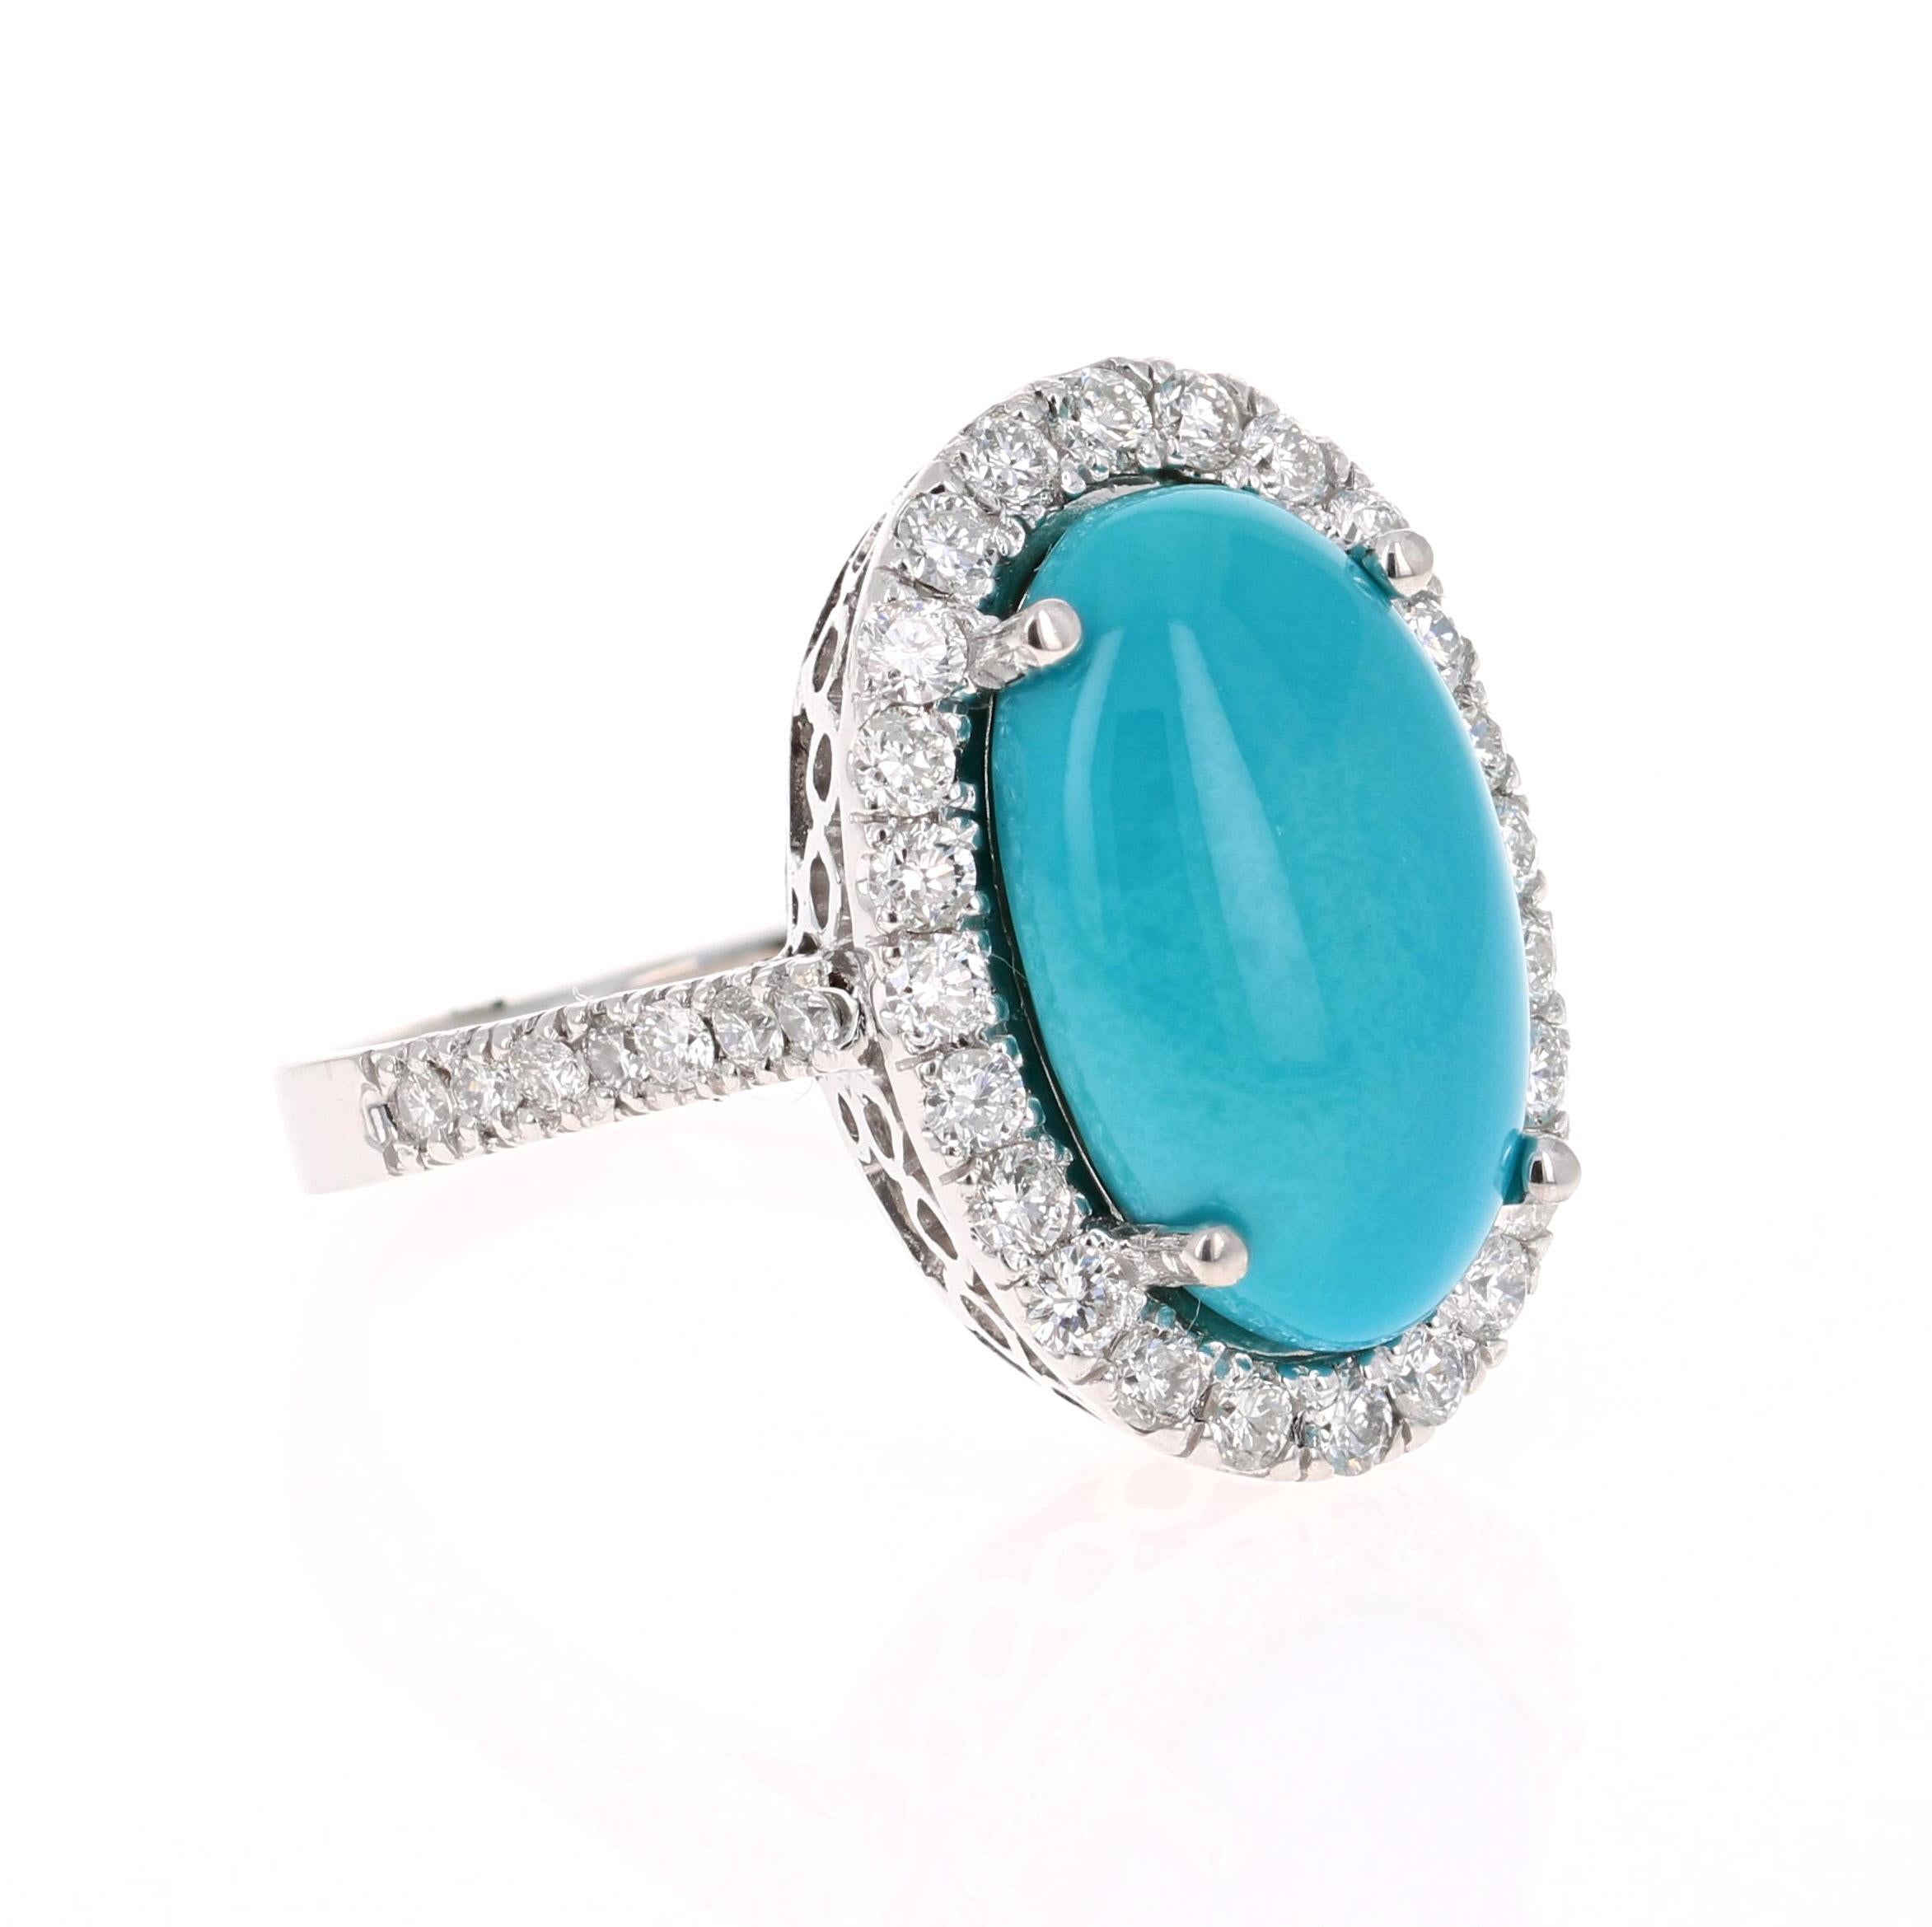 This is an exceptional and unique beauty! 

The Oval Cut Turquoise is 6.56 Carats and is surrounded by a beautiful halo of 38 Round Cut Diamonds that weighs 0.99 Carats. The clarity and color of SI-F. The total carat weight of the ring is 7.55